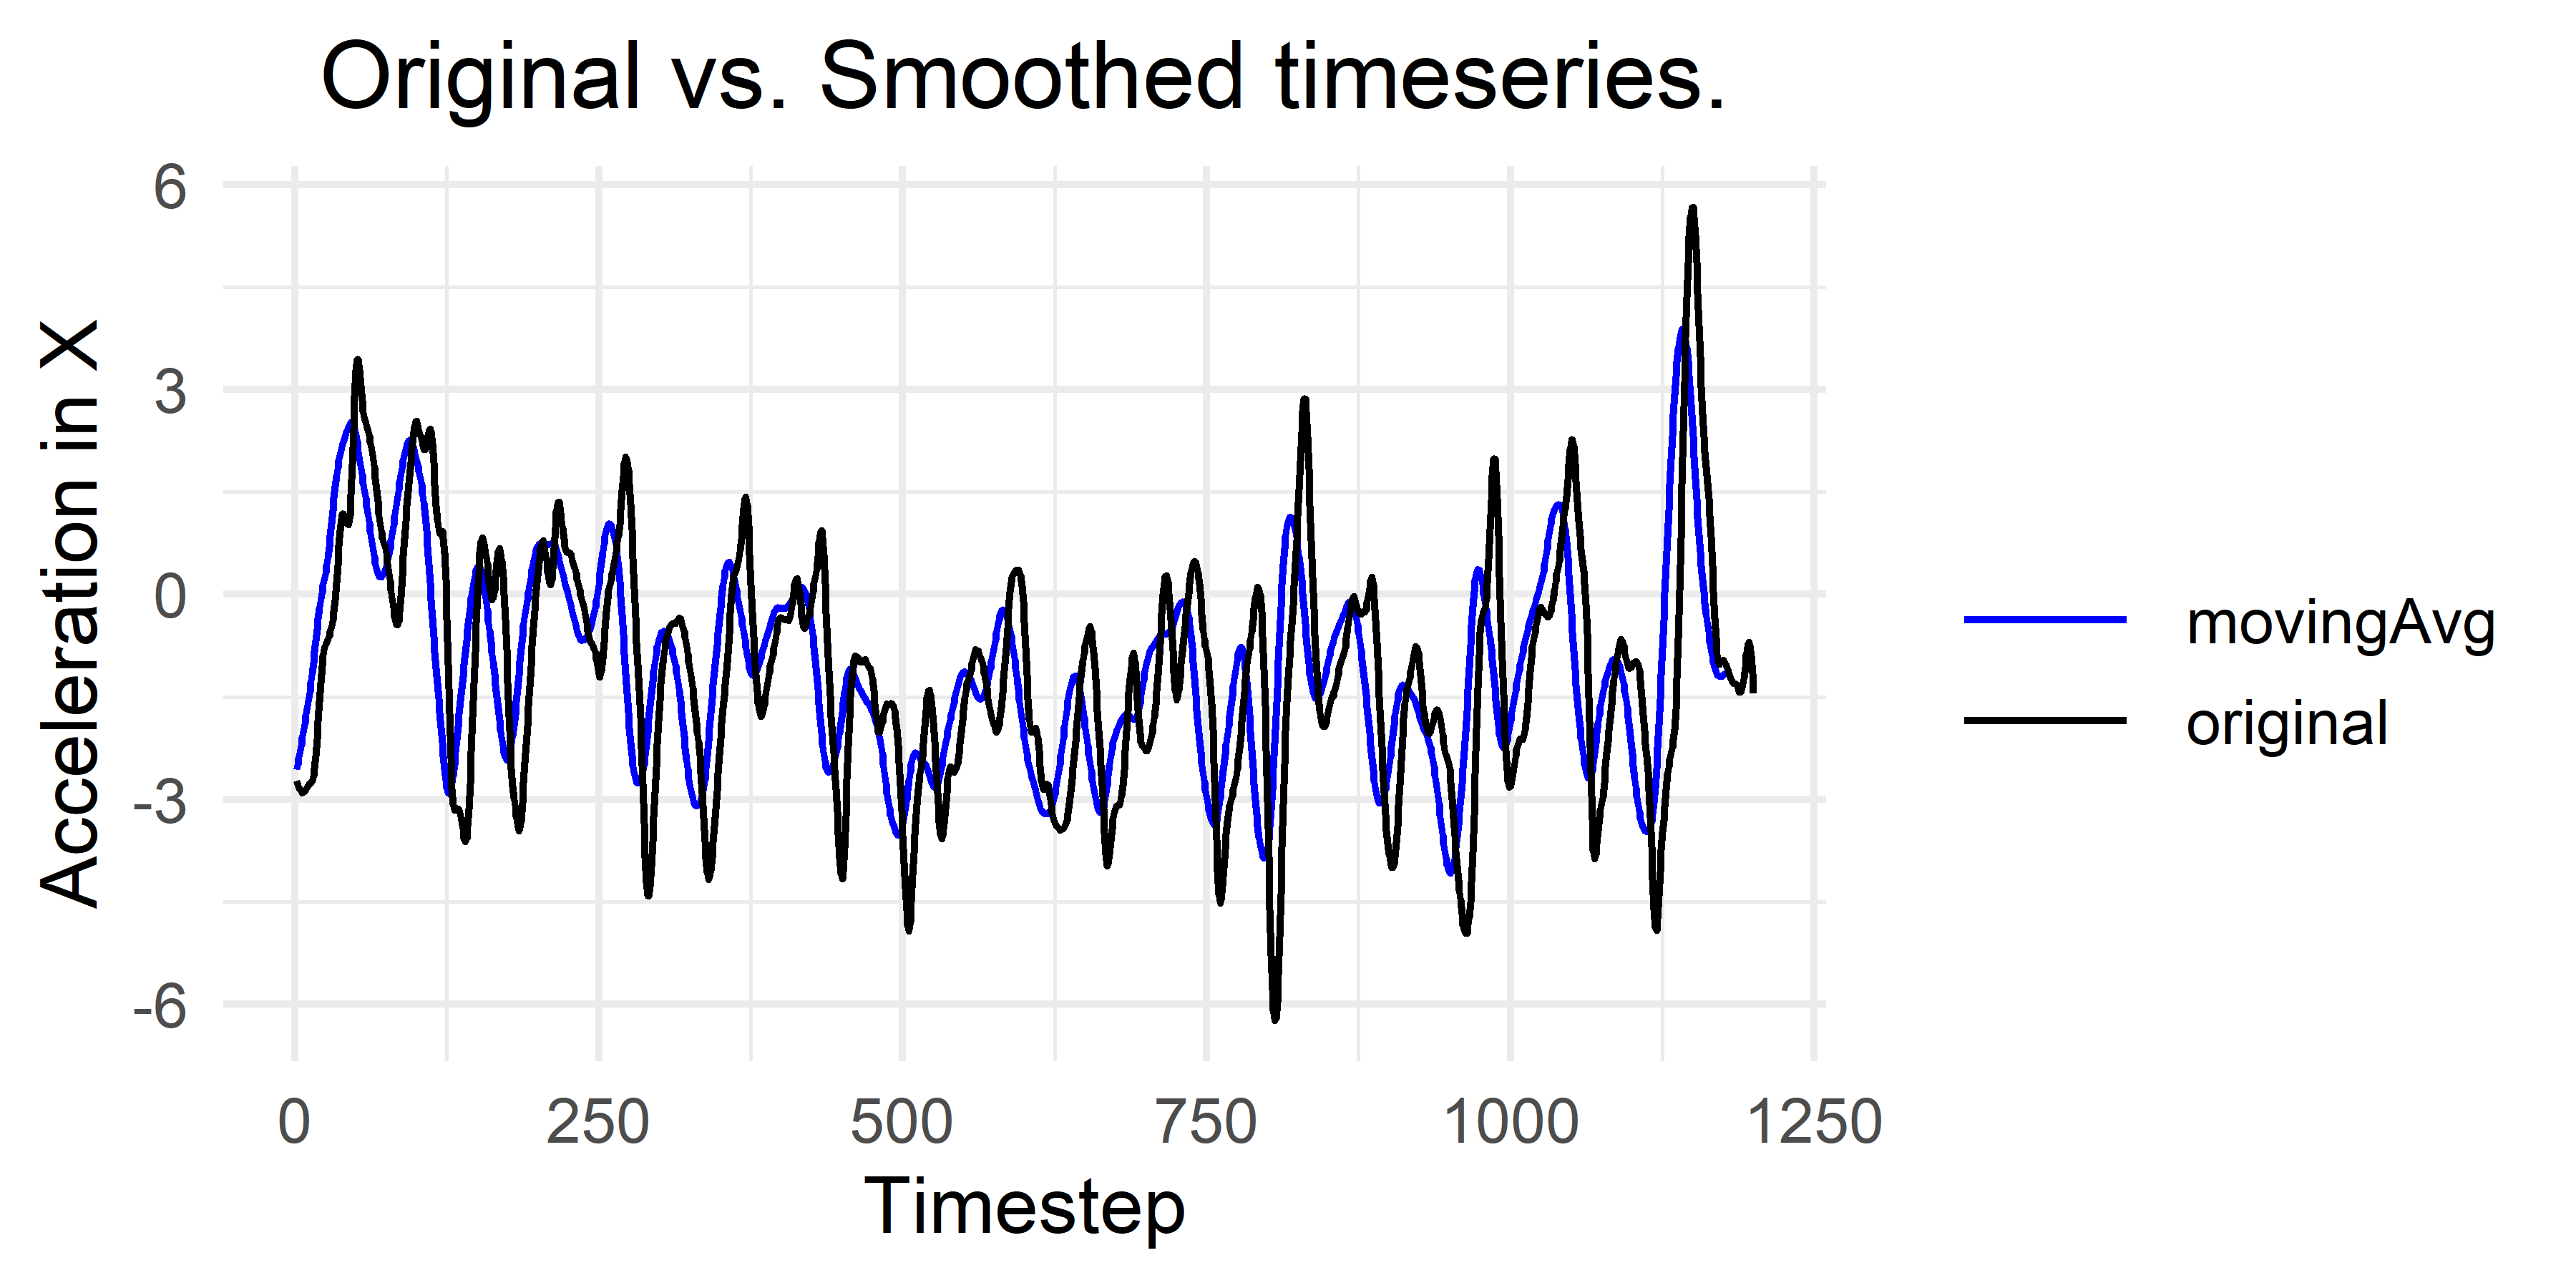 Original time series and smoothed version using a moving average window of size 21.